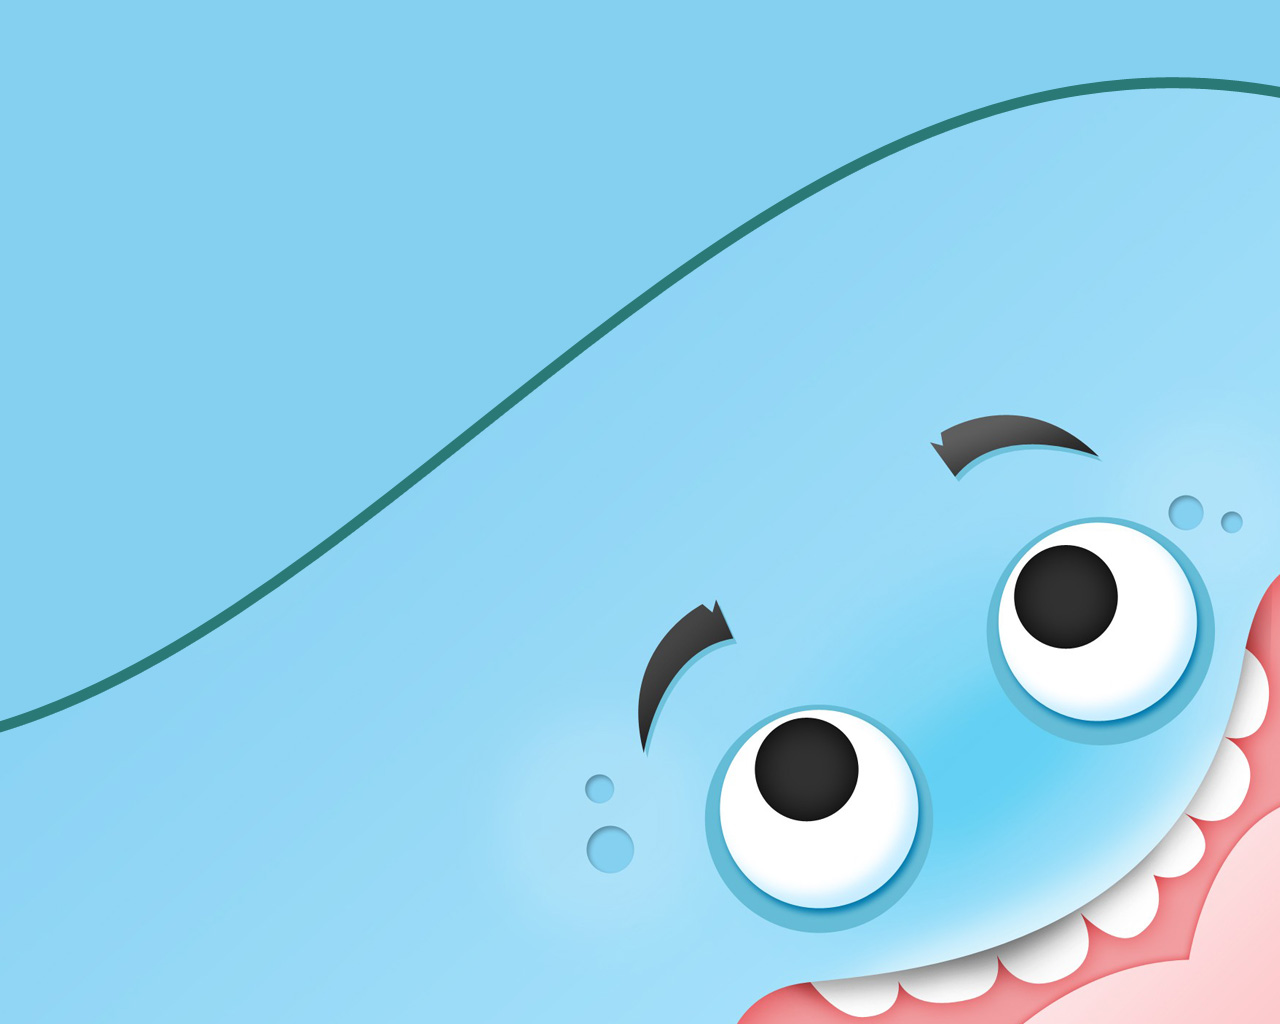 Cartoon Character Powerpoint Background Hd Image - Fun Backgrounds For  Powerpoint - 1280x1024 Wallpaper 